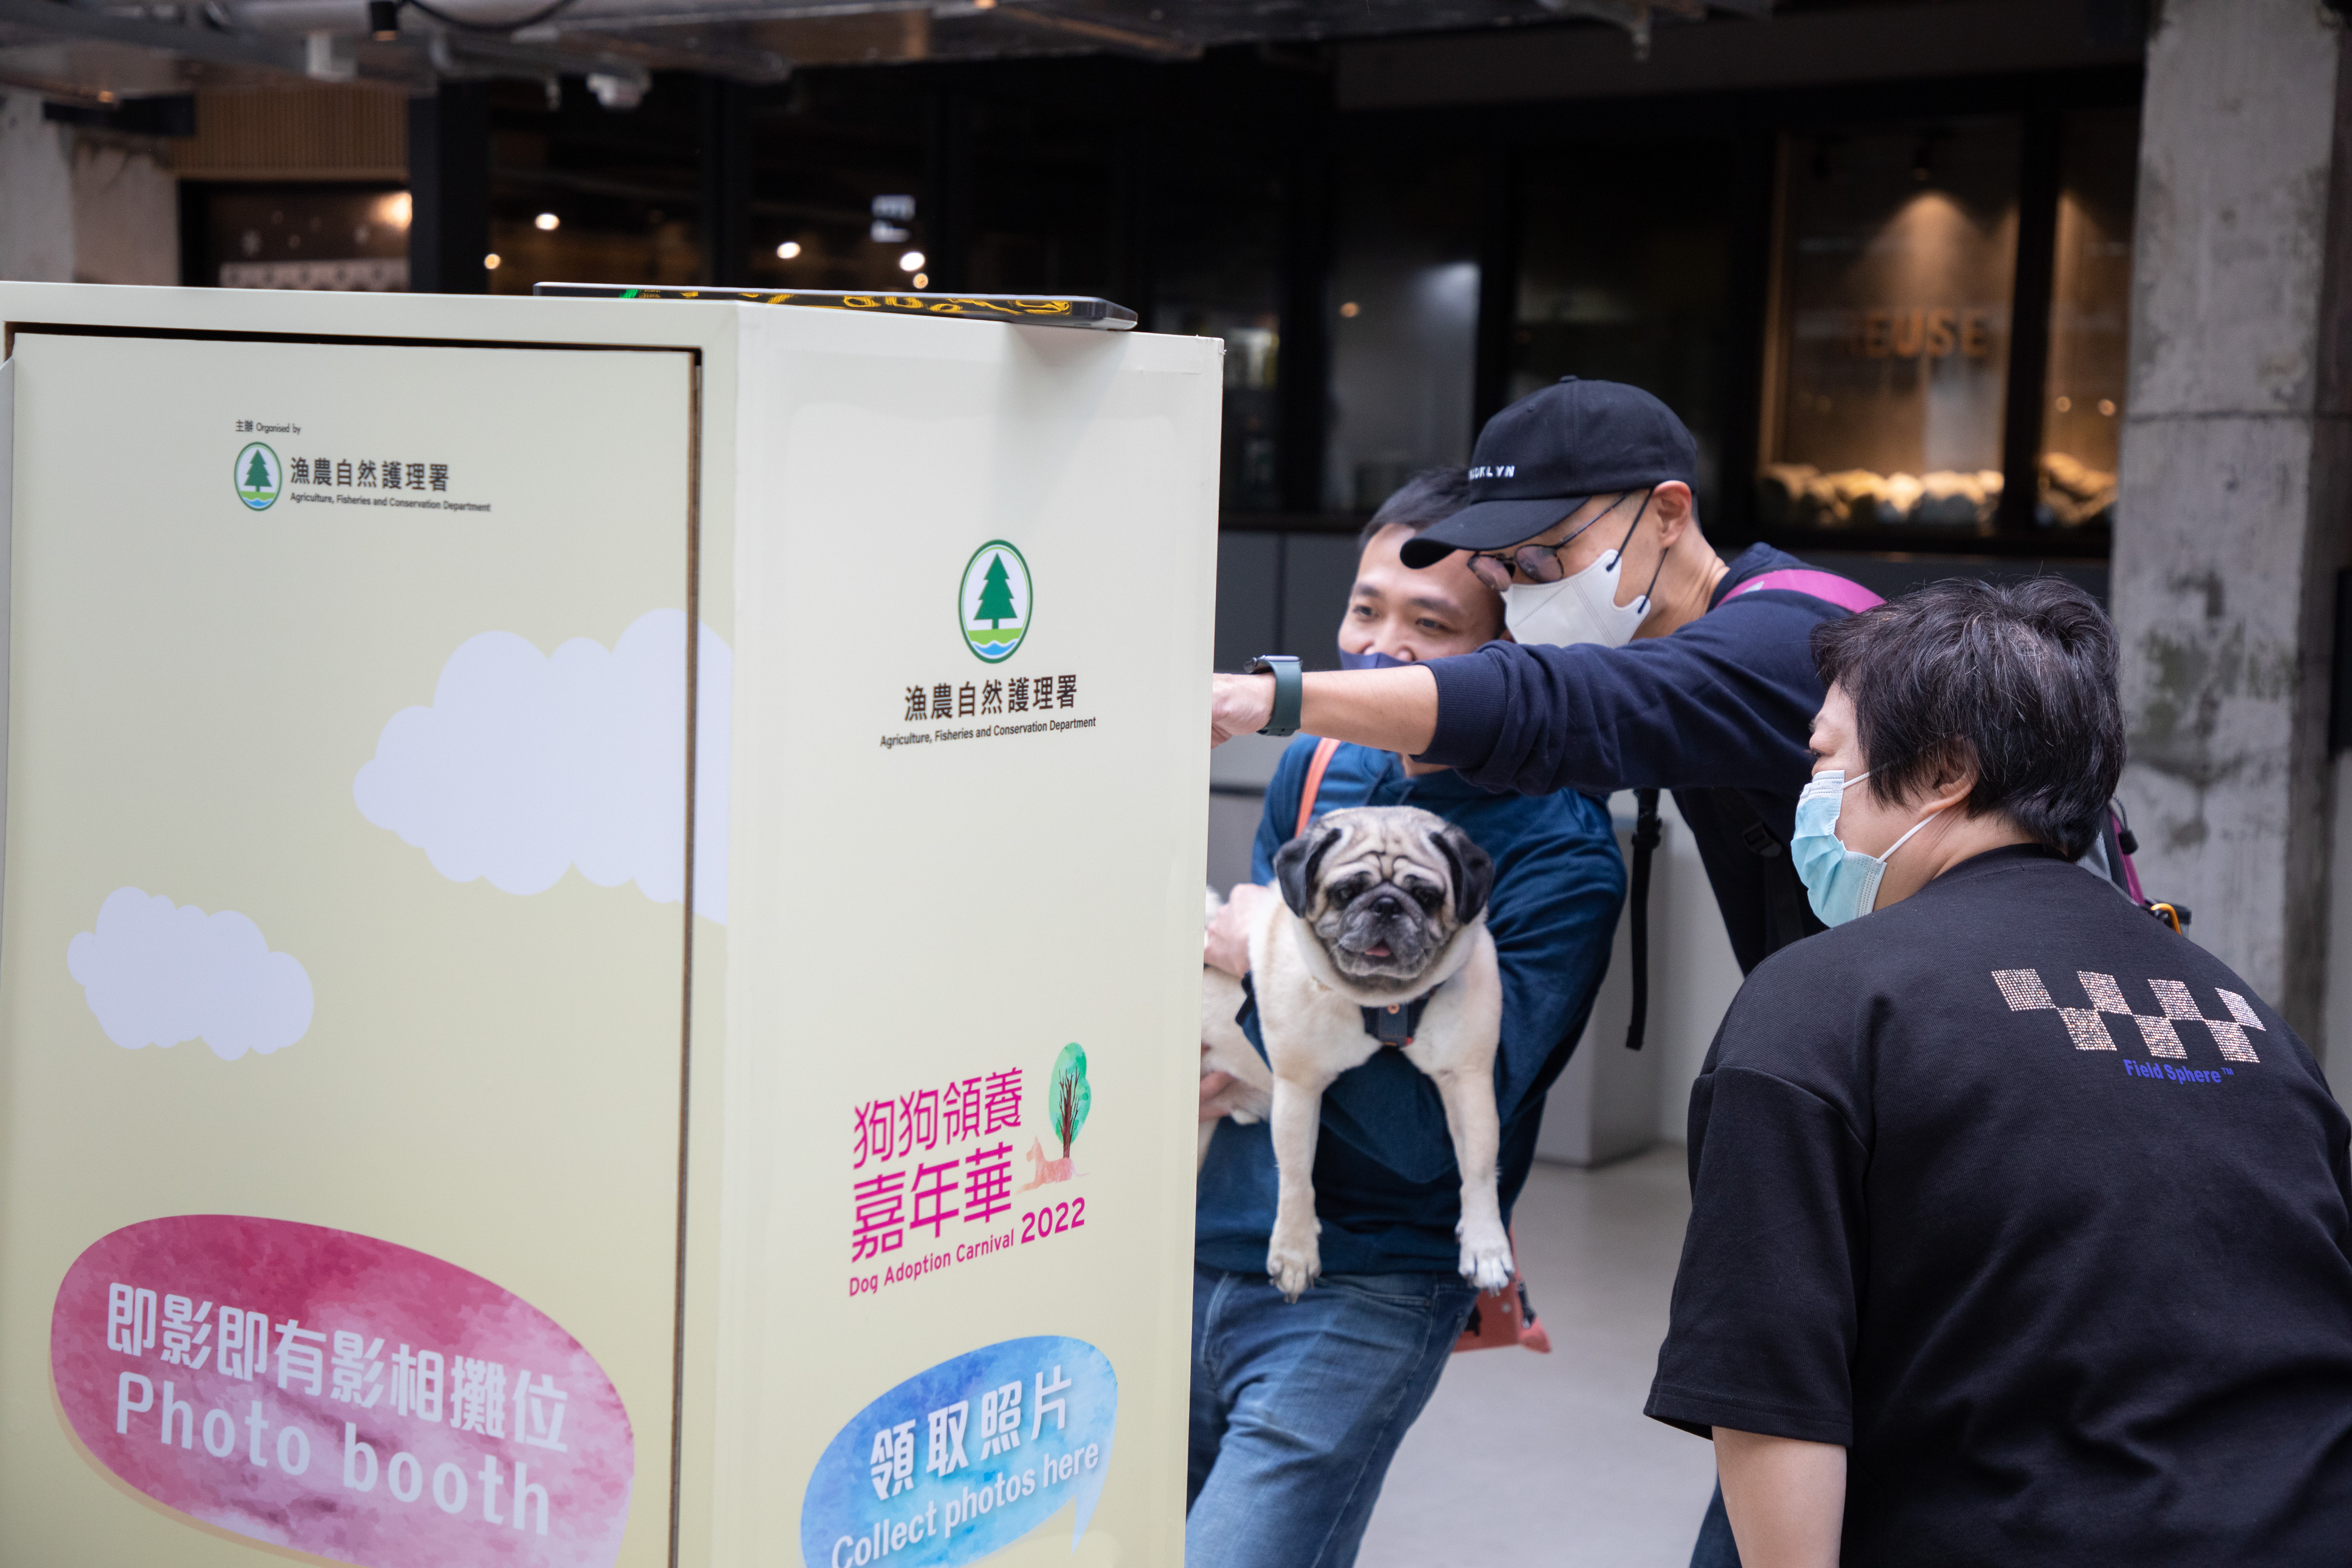 The digital photo booth captured visitors posing with their beloved dogs, showcasing their joyful moments.